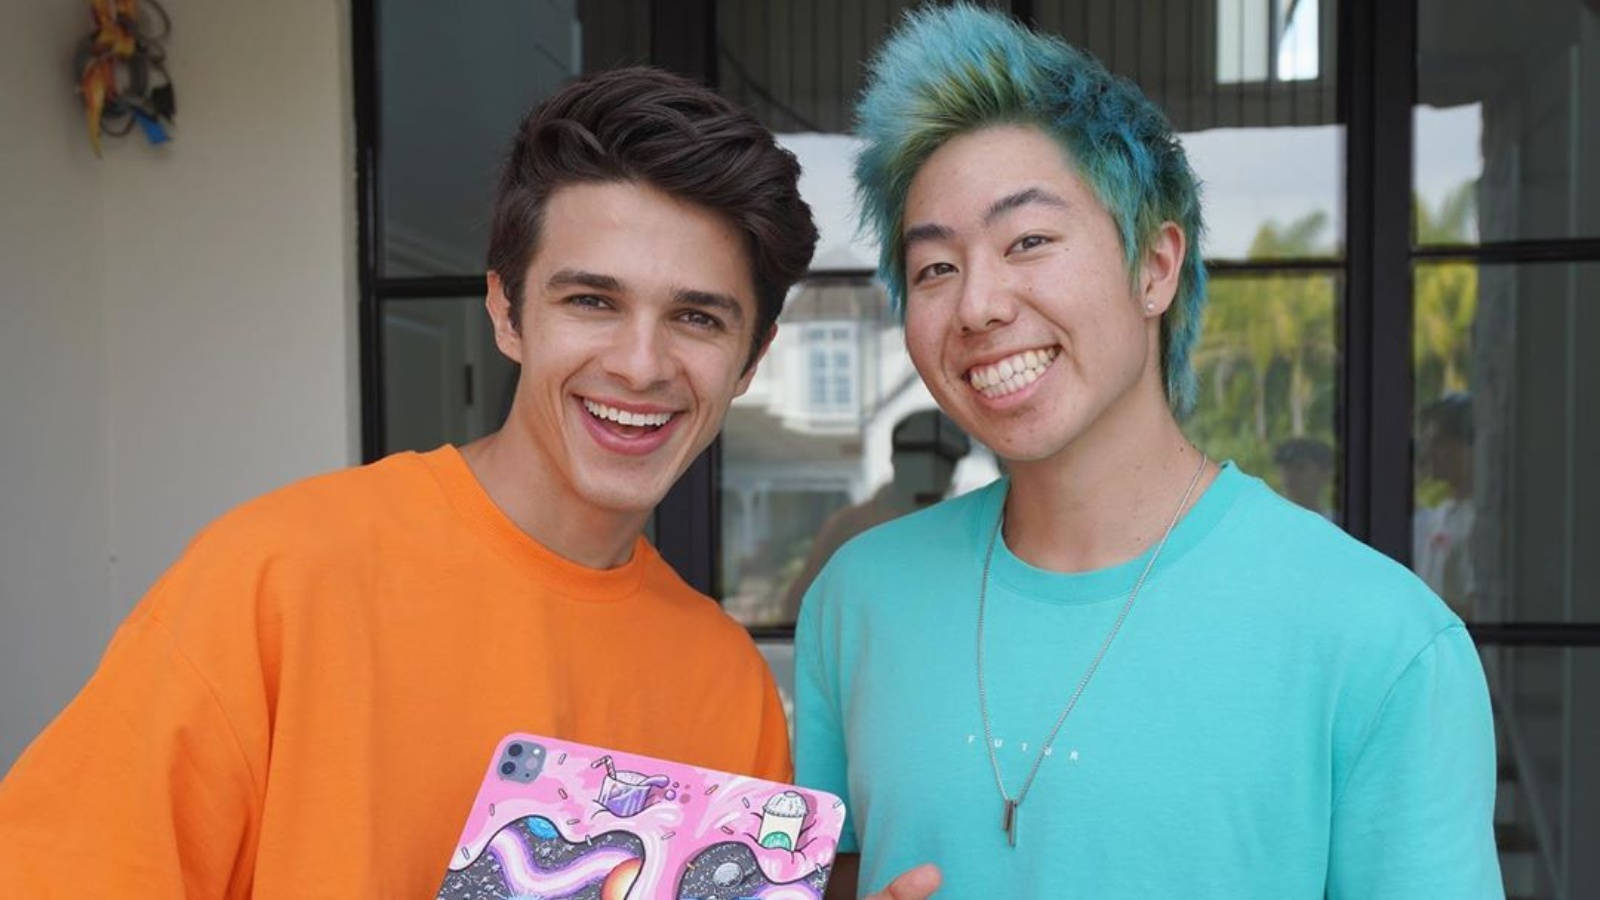 Brent Rivera And Zach Hsieh Wallpaper